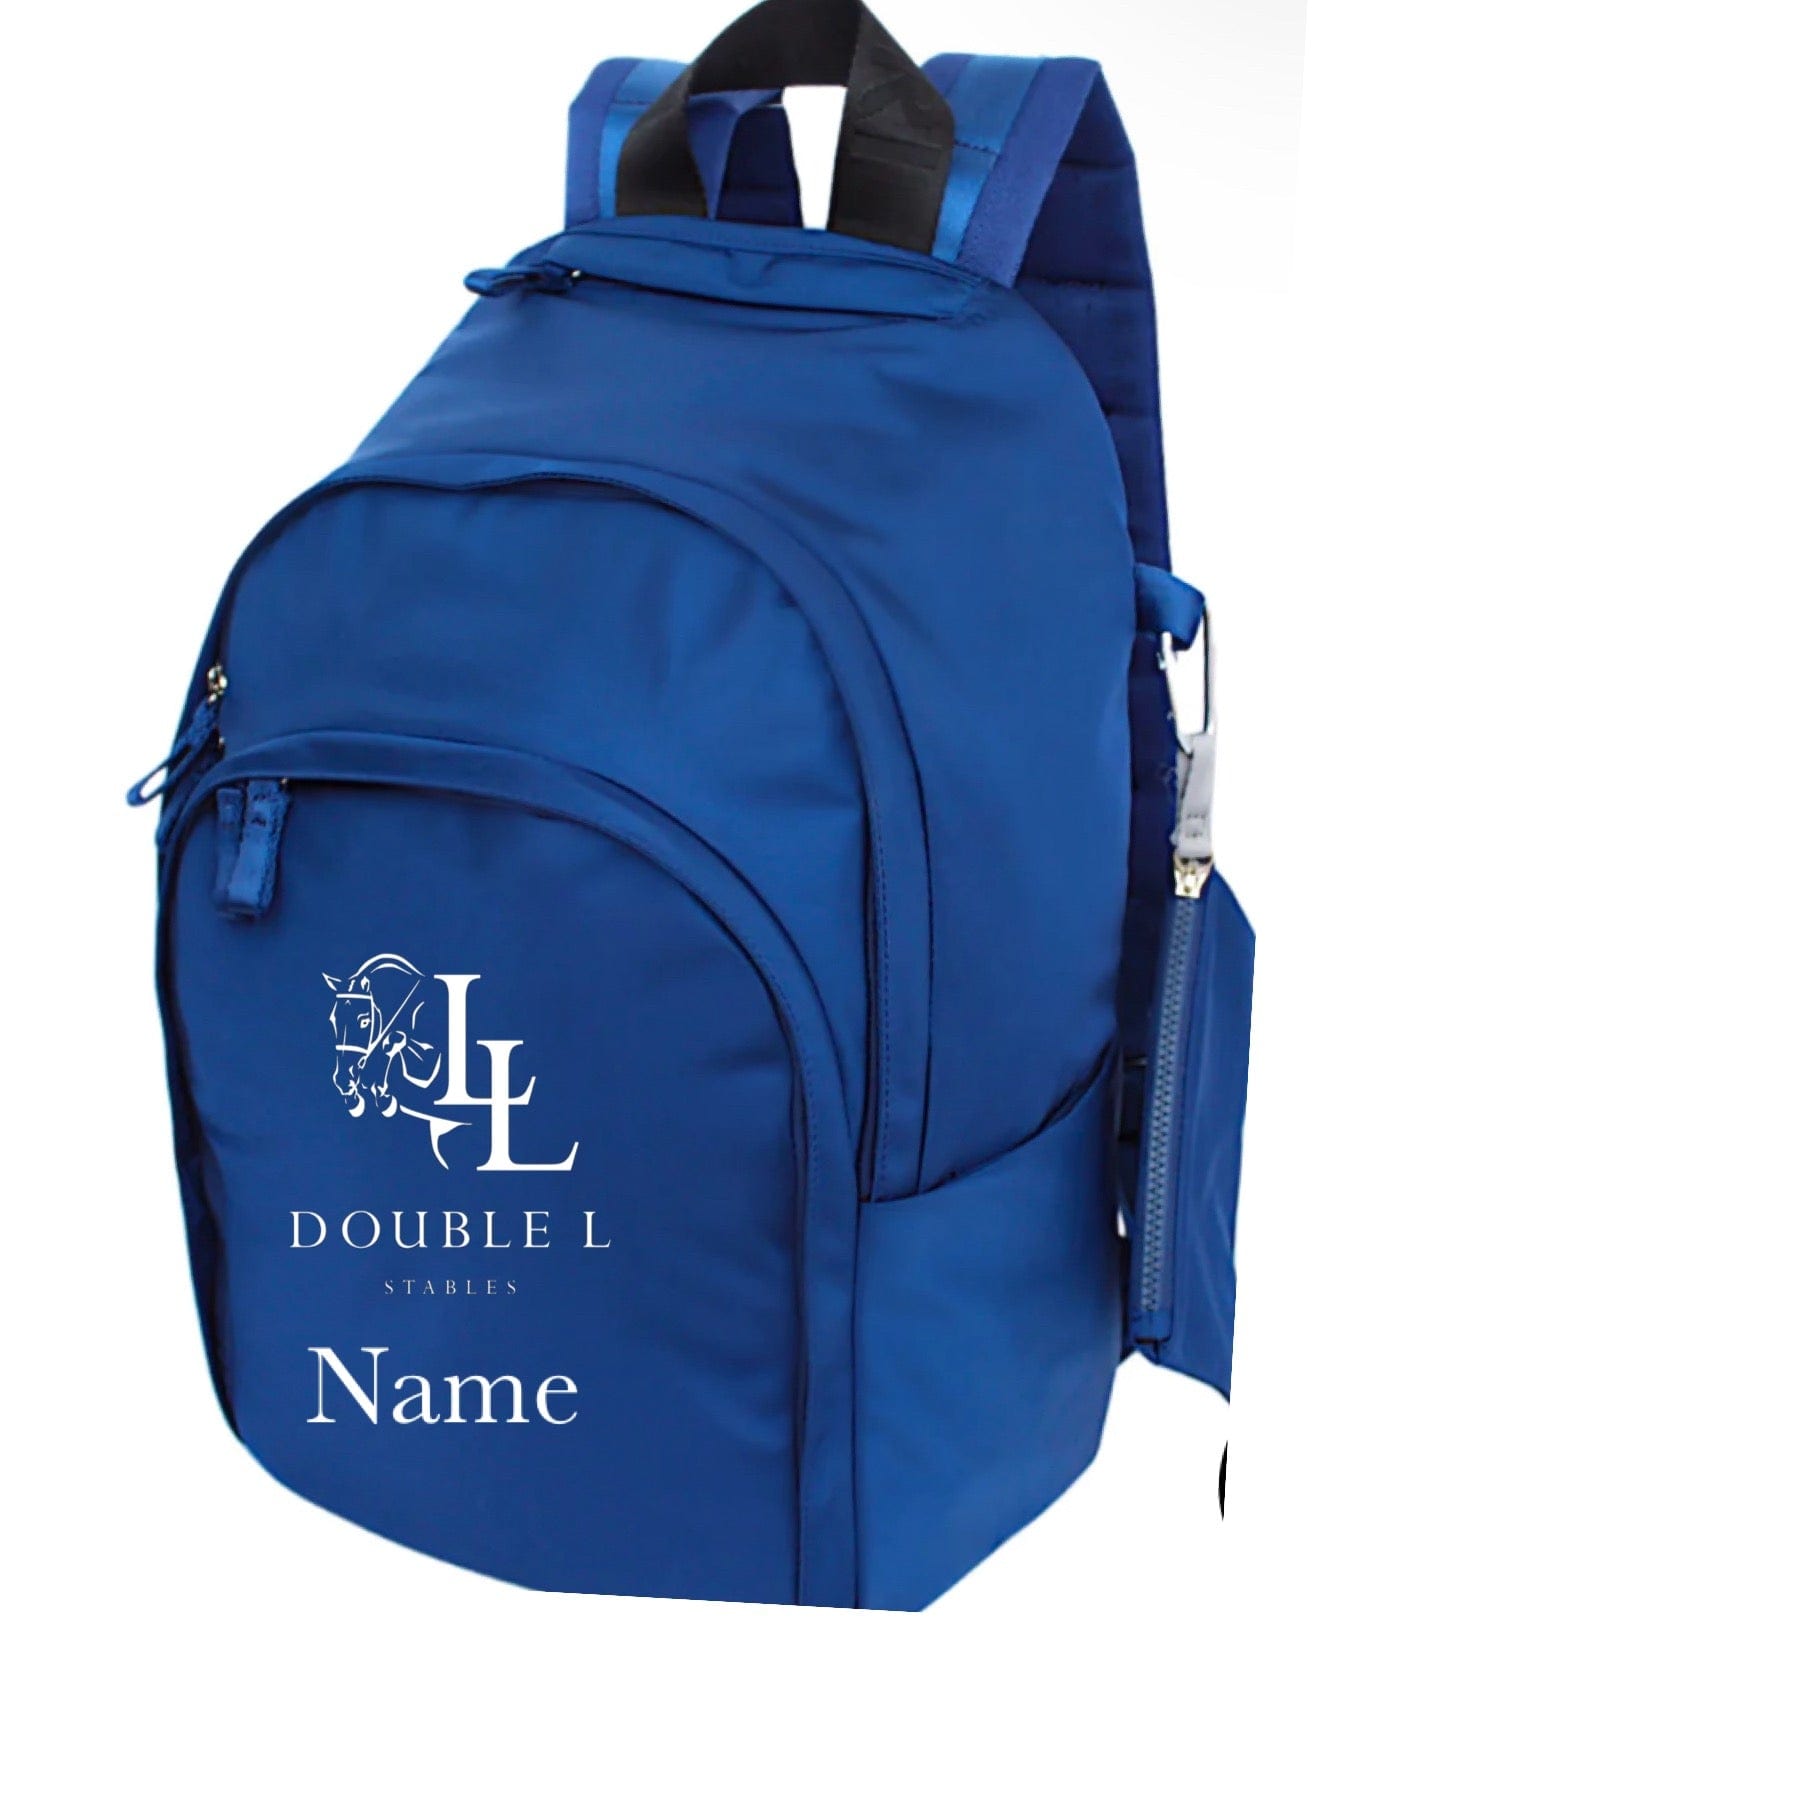 Equestrian Team Apparel Double L Stables Veltri Helmet Backpack equestrian team apparel online tack store mobile tack store custom farm apparel custom show stable clothing equestrian lifestyle horse show clothing riding clothes horses equestrian tack store